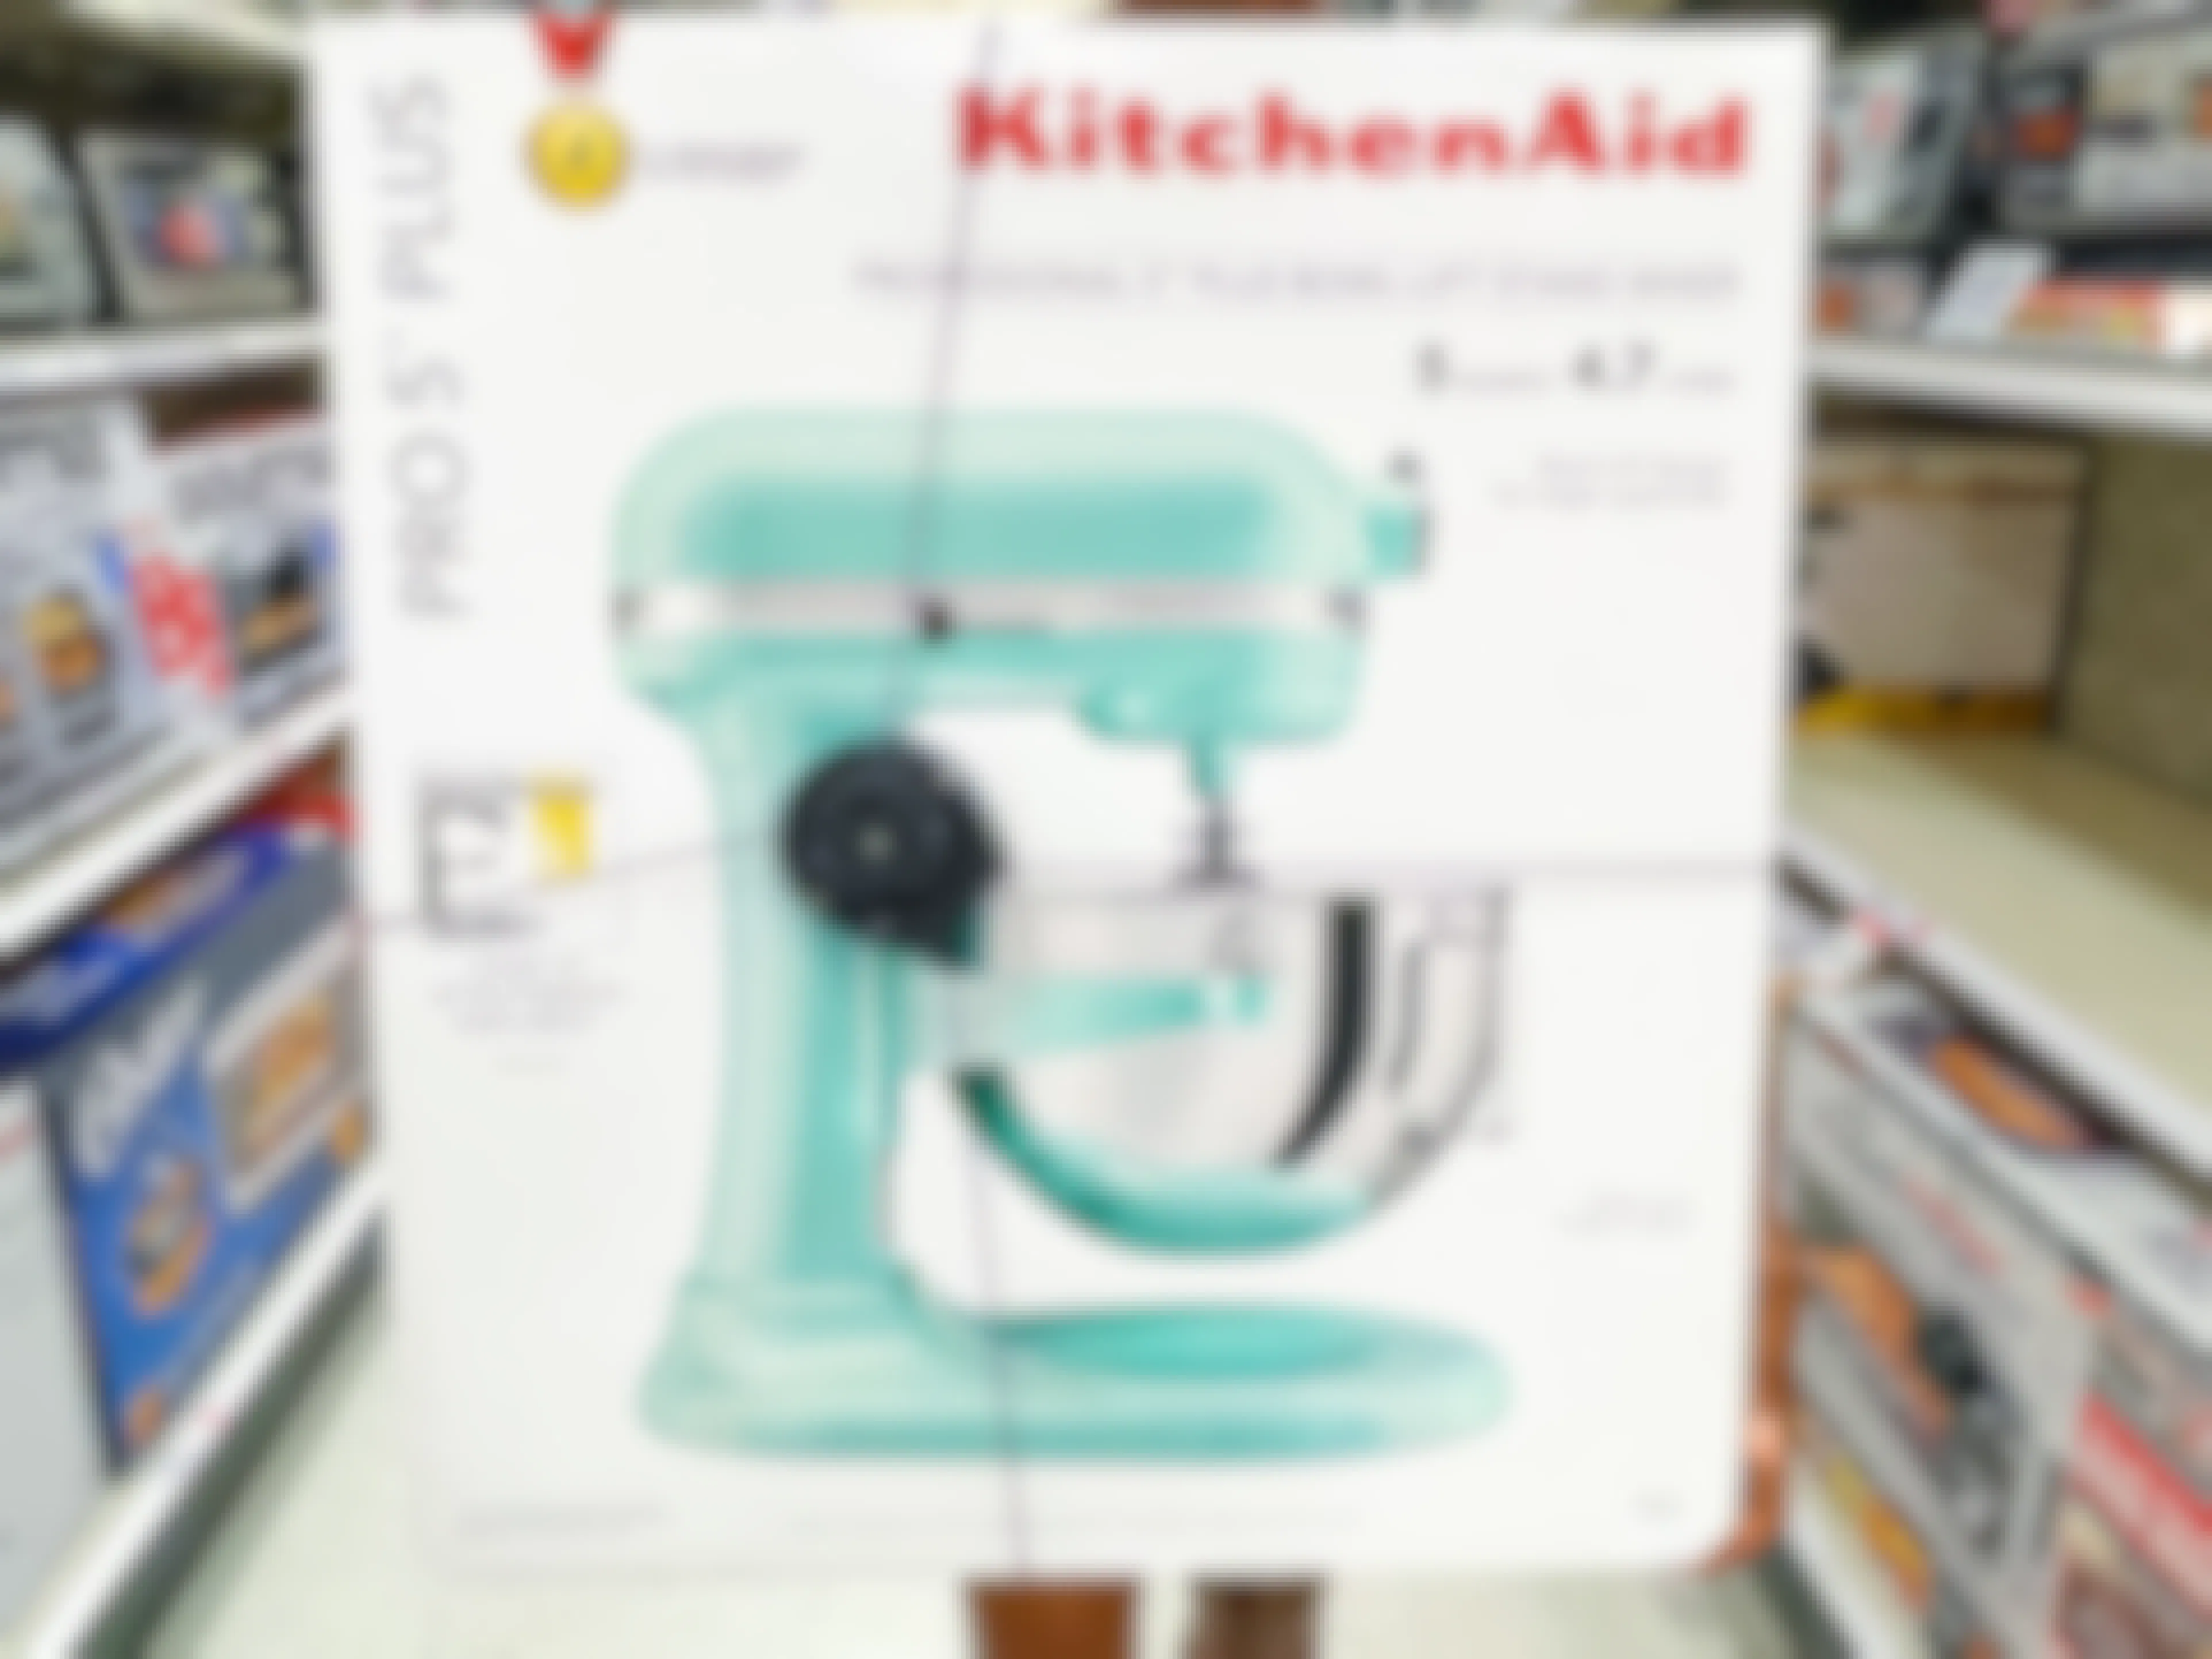 Someone holding a KitchenAid 5 quart stand mixer in an aisle at Target.